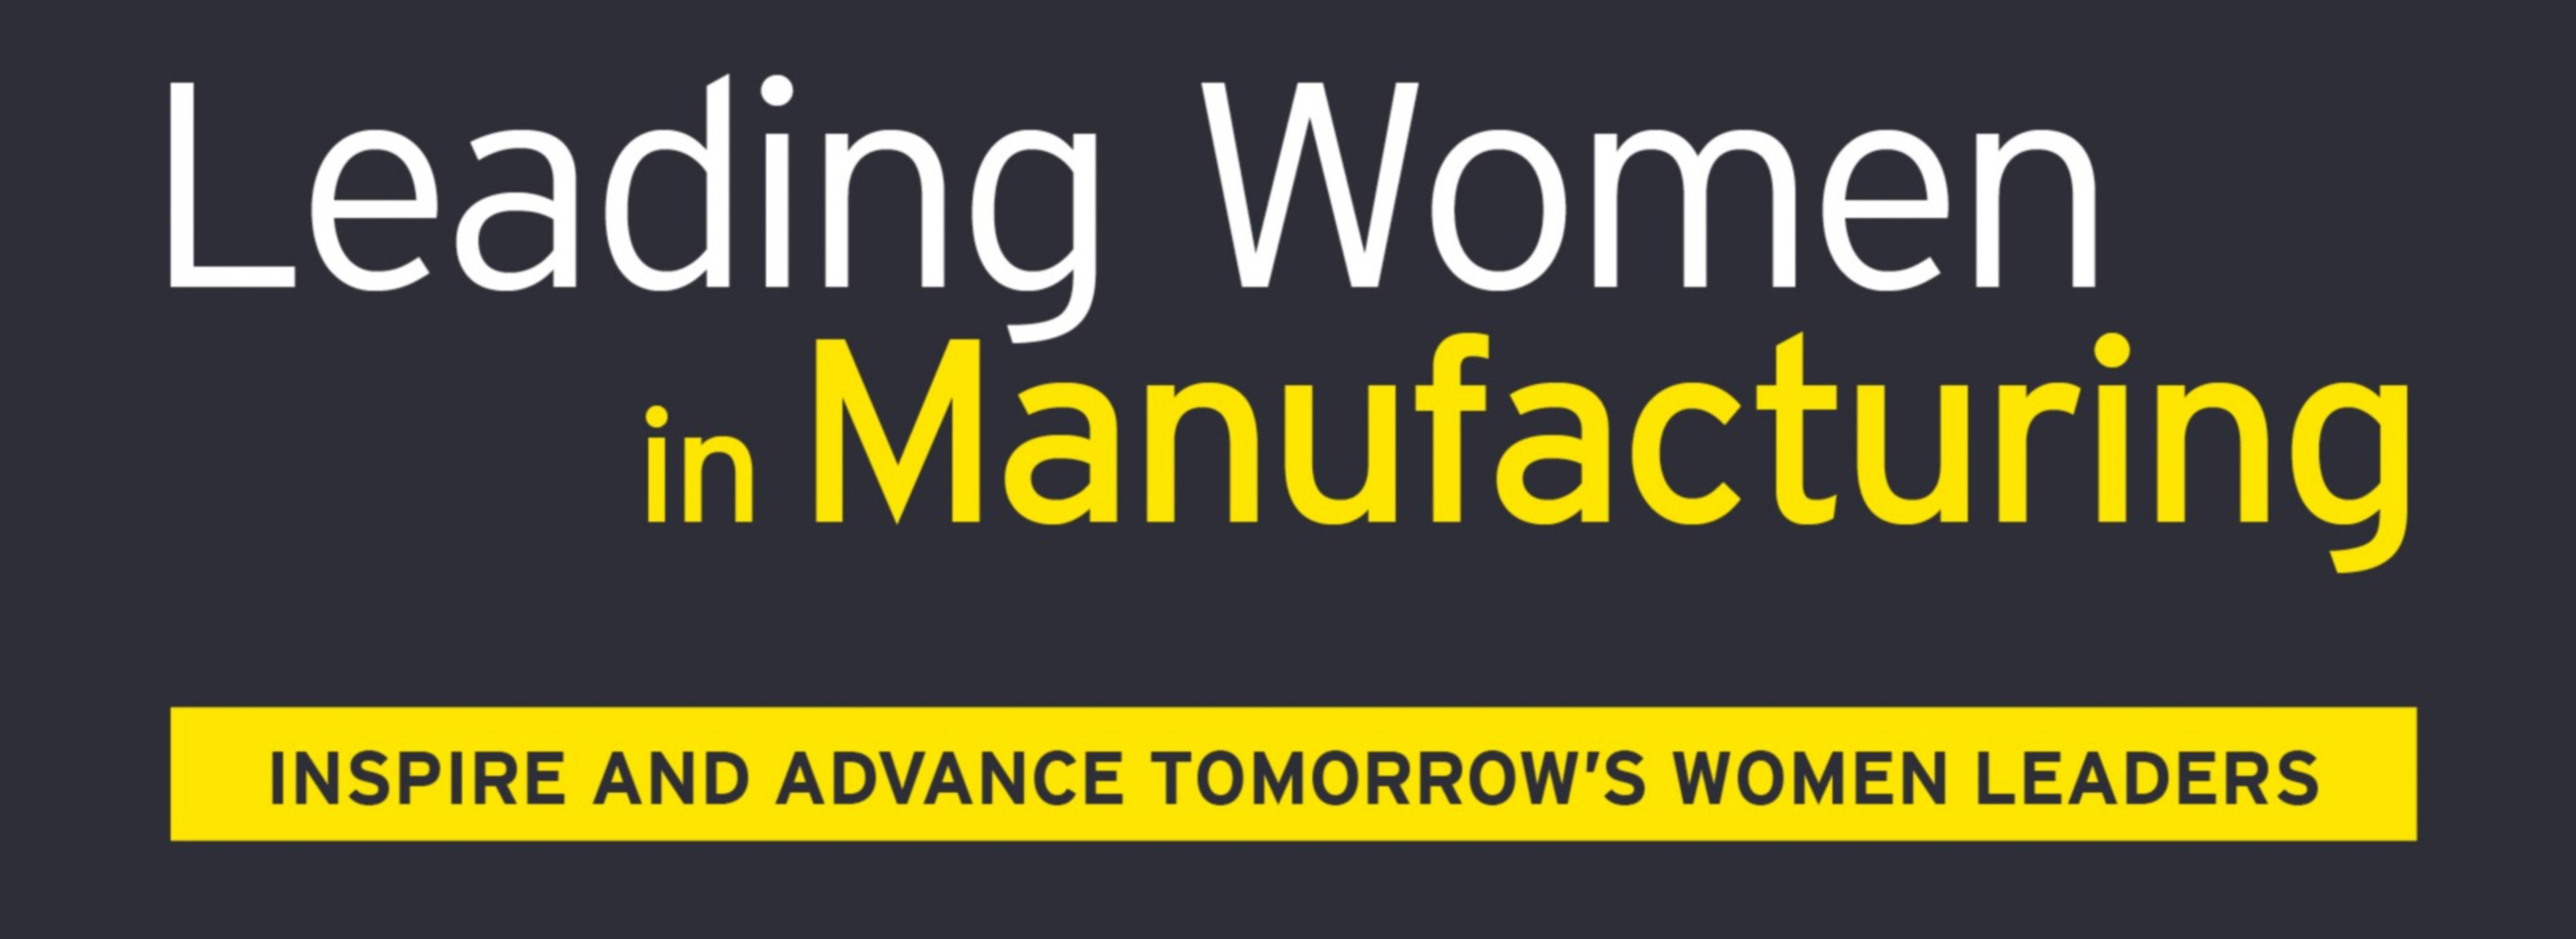 EY - Leading Women in Manufacturing